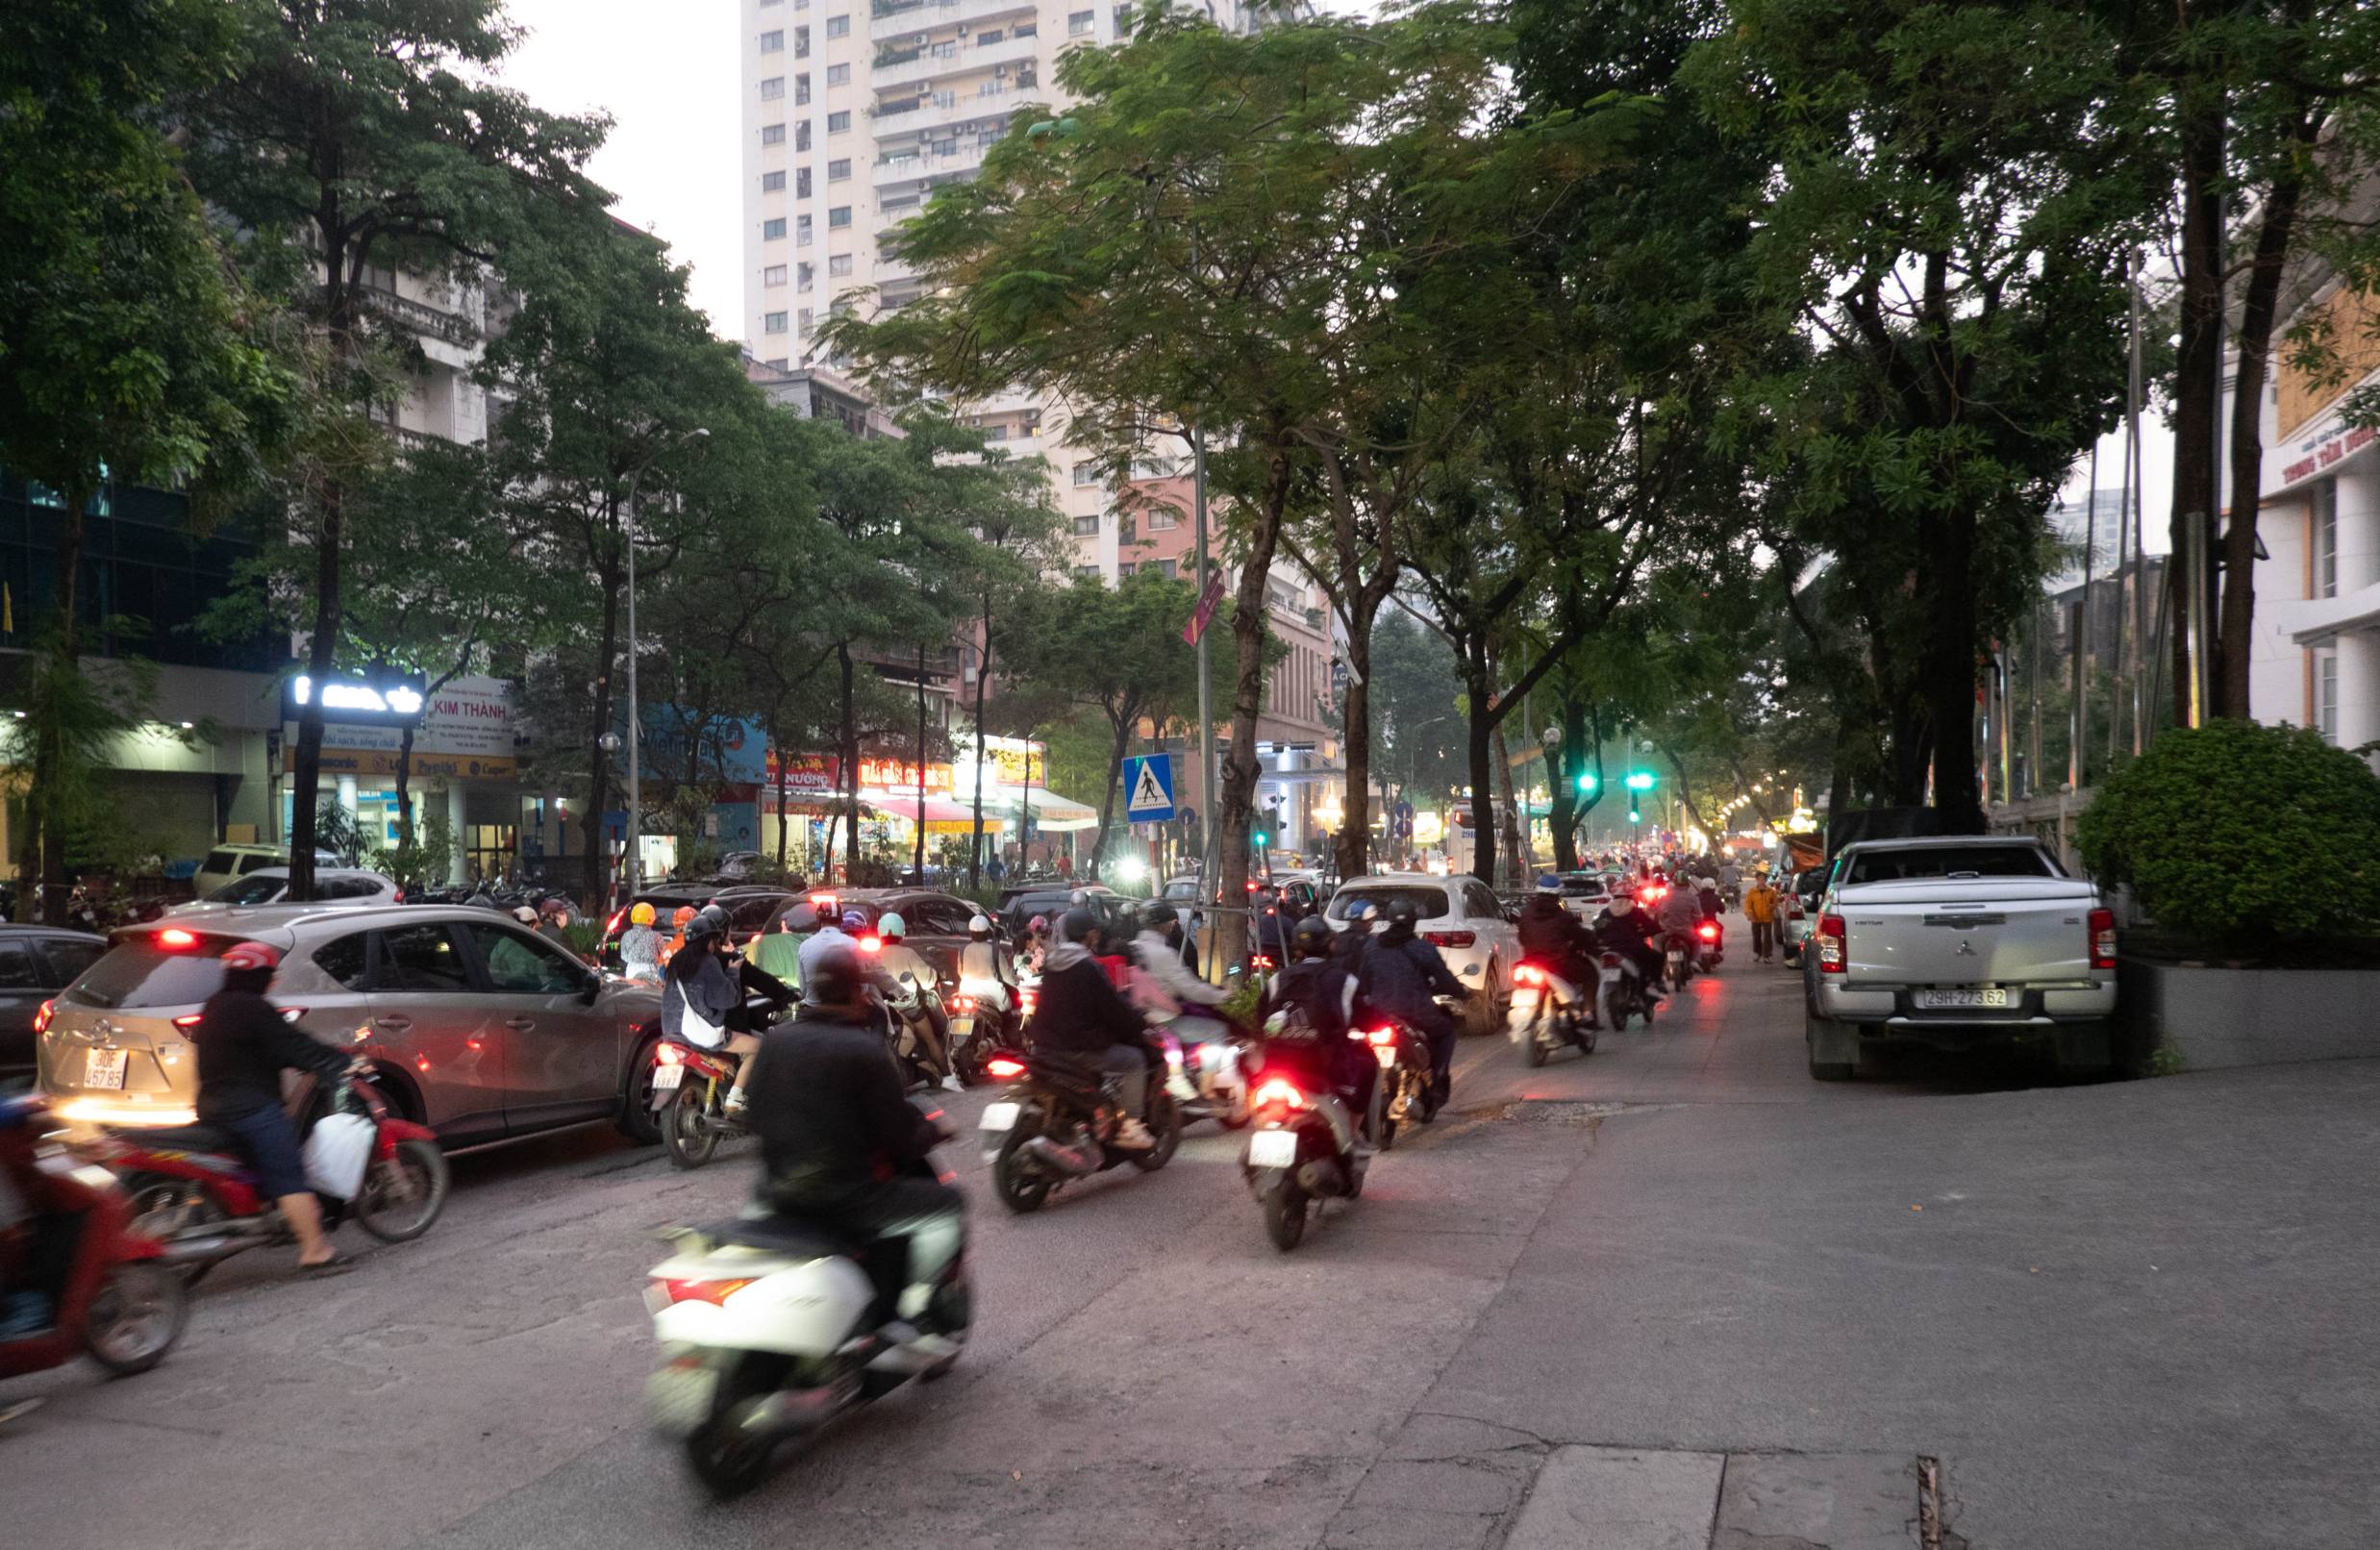 Crowded scene of motorbikes and cars